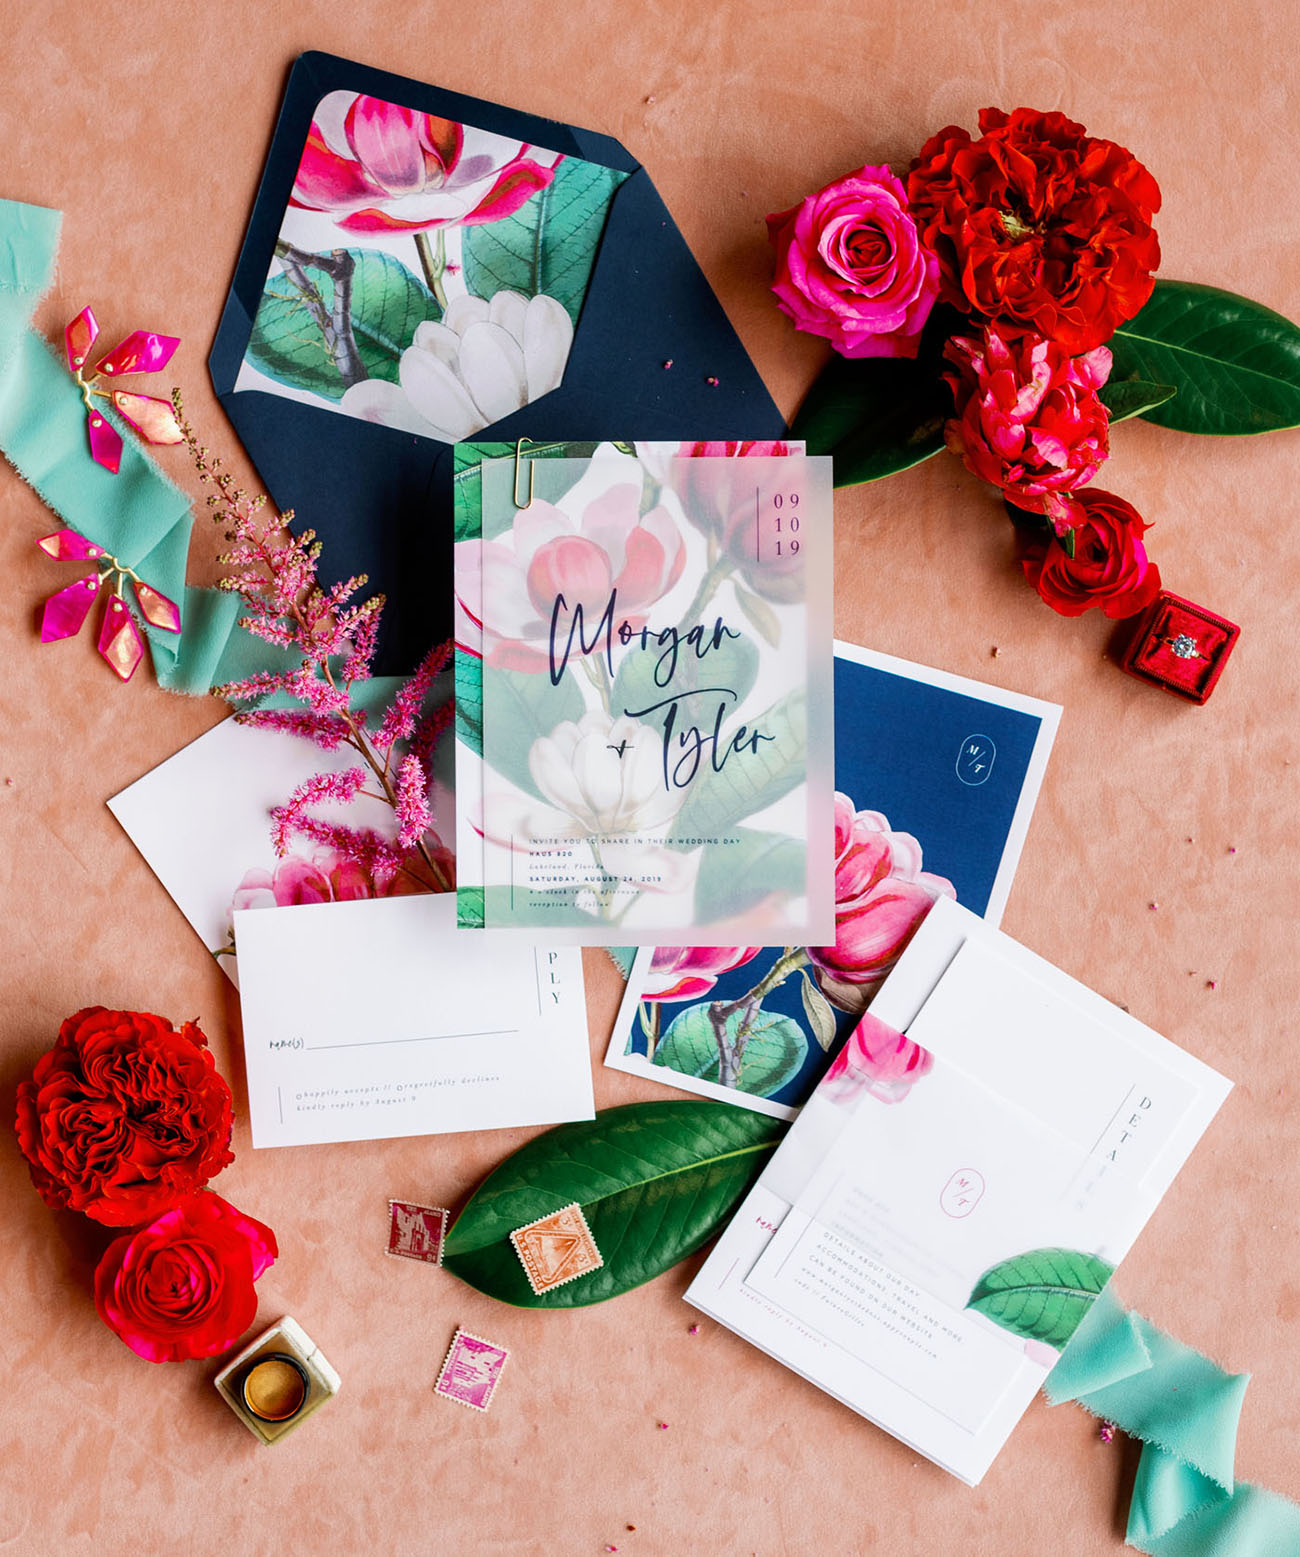 Colorful and Modern Industrial Wedding Inspiration